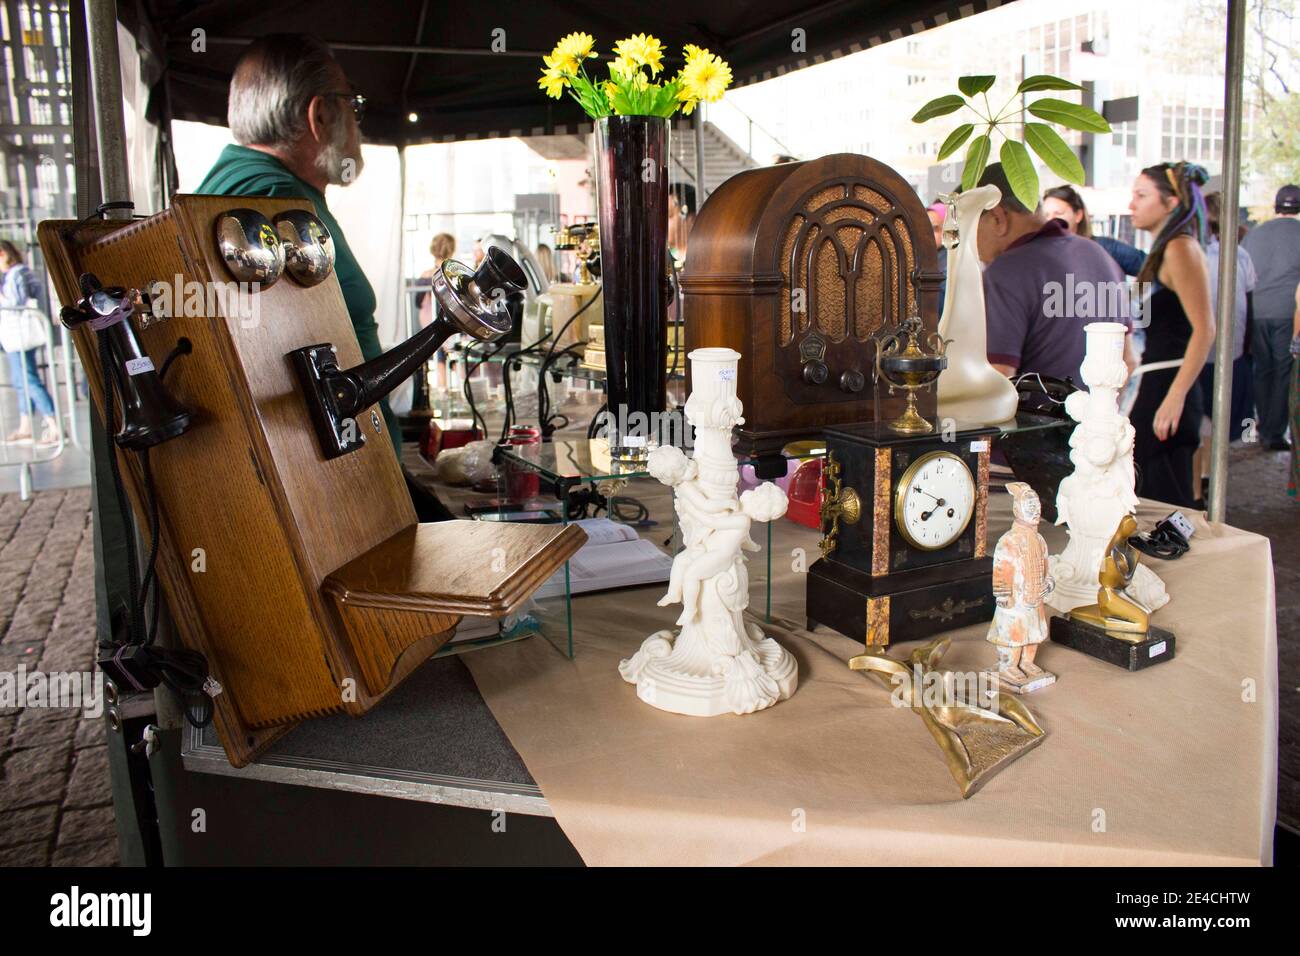 Sao Paulo / SP / Brazil - 01 03 18: Flea market with various objects and people near the stuff. Stock Photo